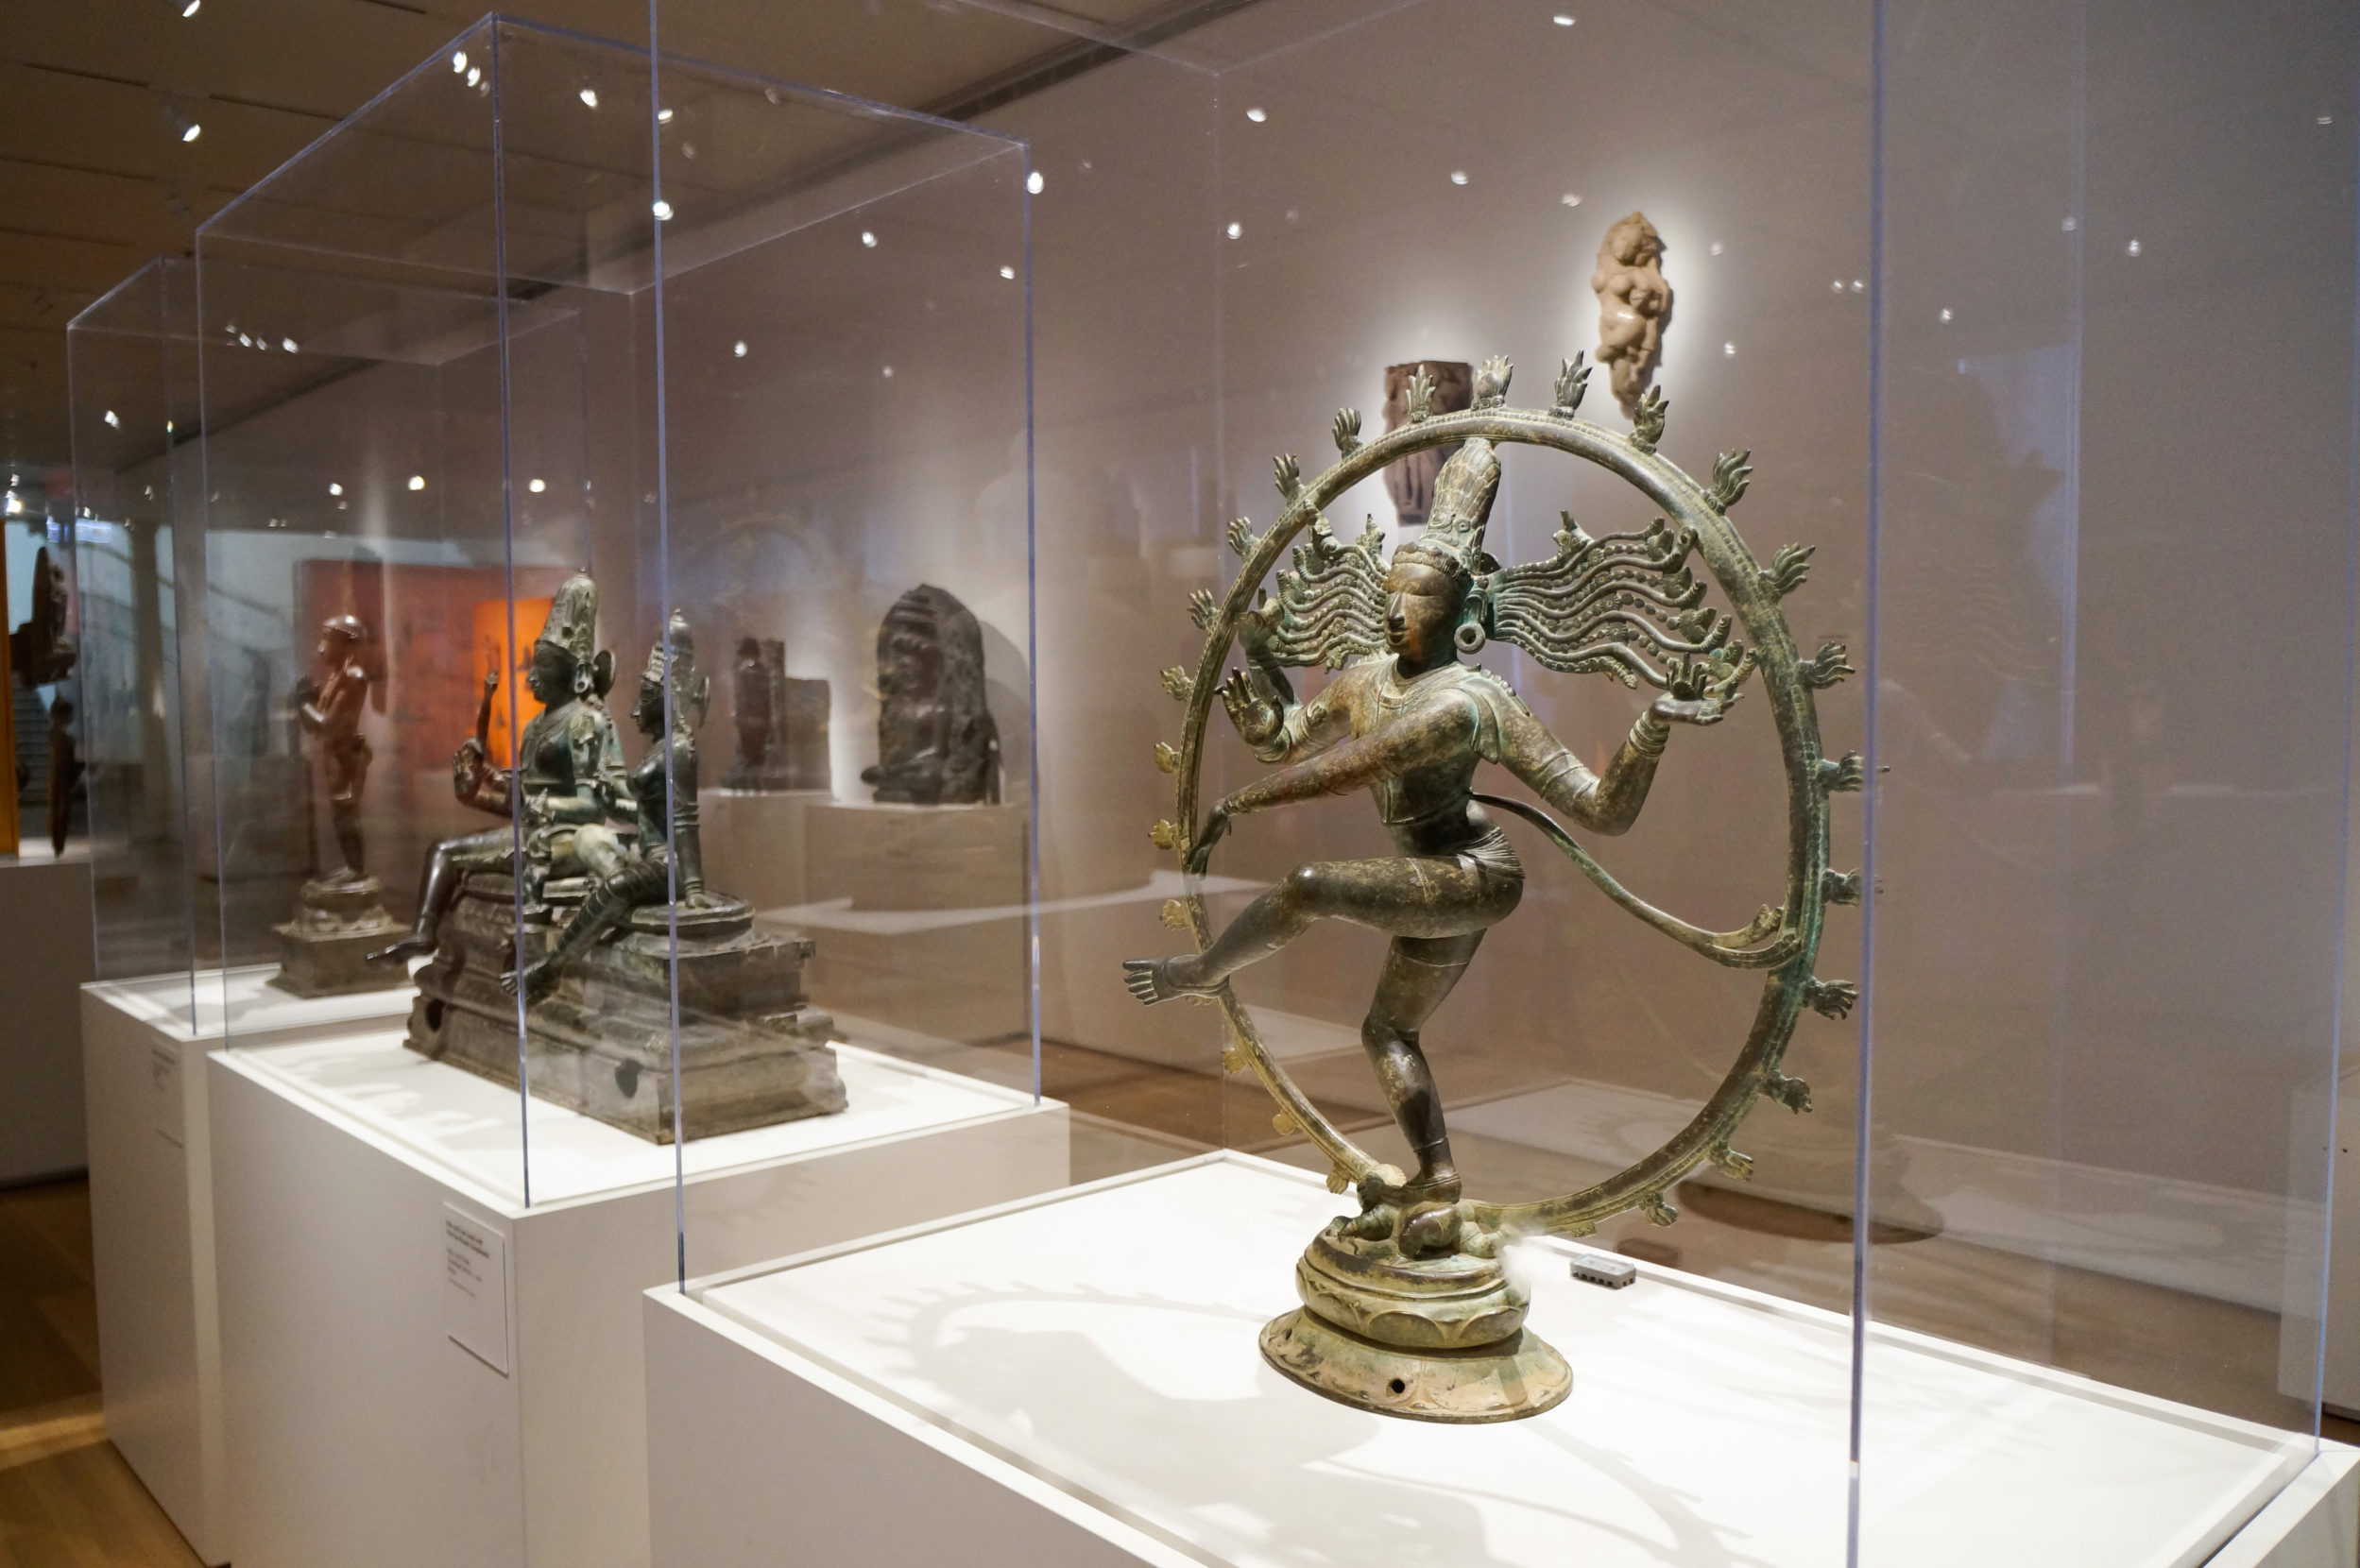 A bronze Nataraja sculpture resides at the Art Institute of Chicago. An artifact from India’s Chola empire, this idol was sold to the museum in 1965 by William H. Wolff, a now-deceased New York art dealer who admitted to sometimes practicing questionable tactics in the export of antiquities. Photo: Cathyrose Melloan/Alamy.